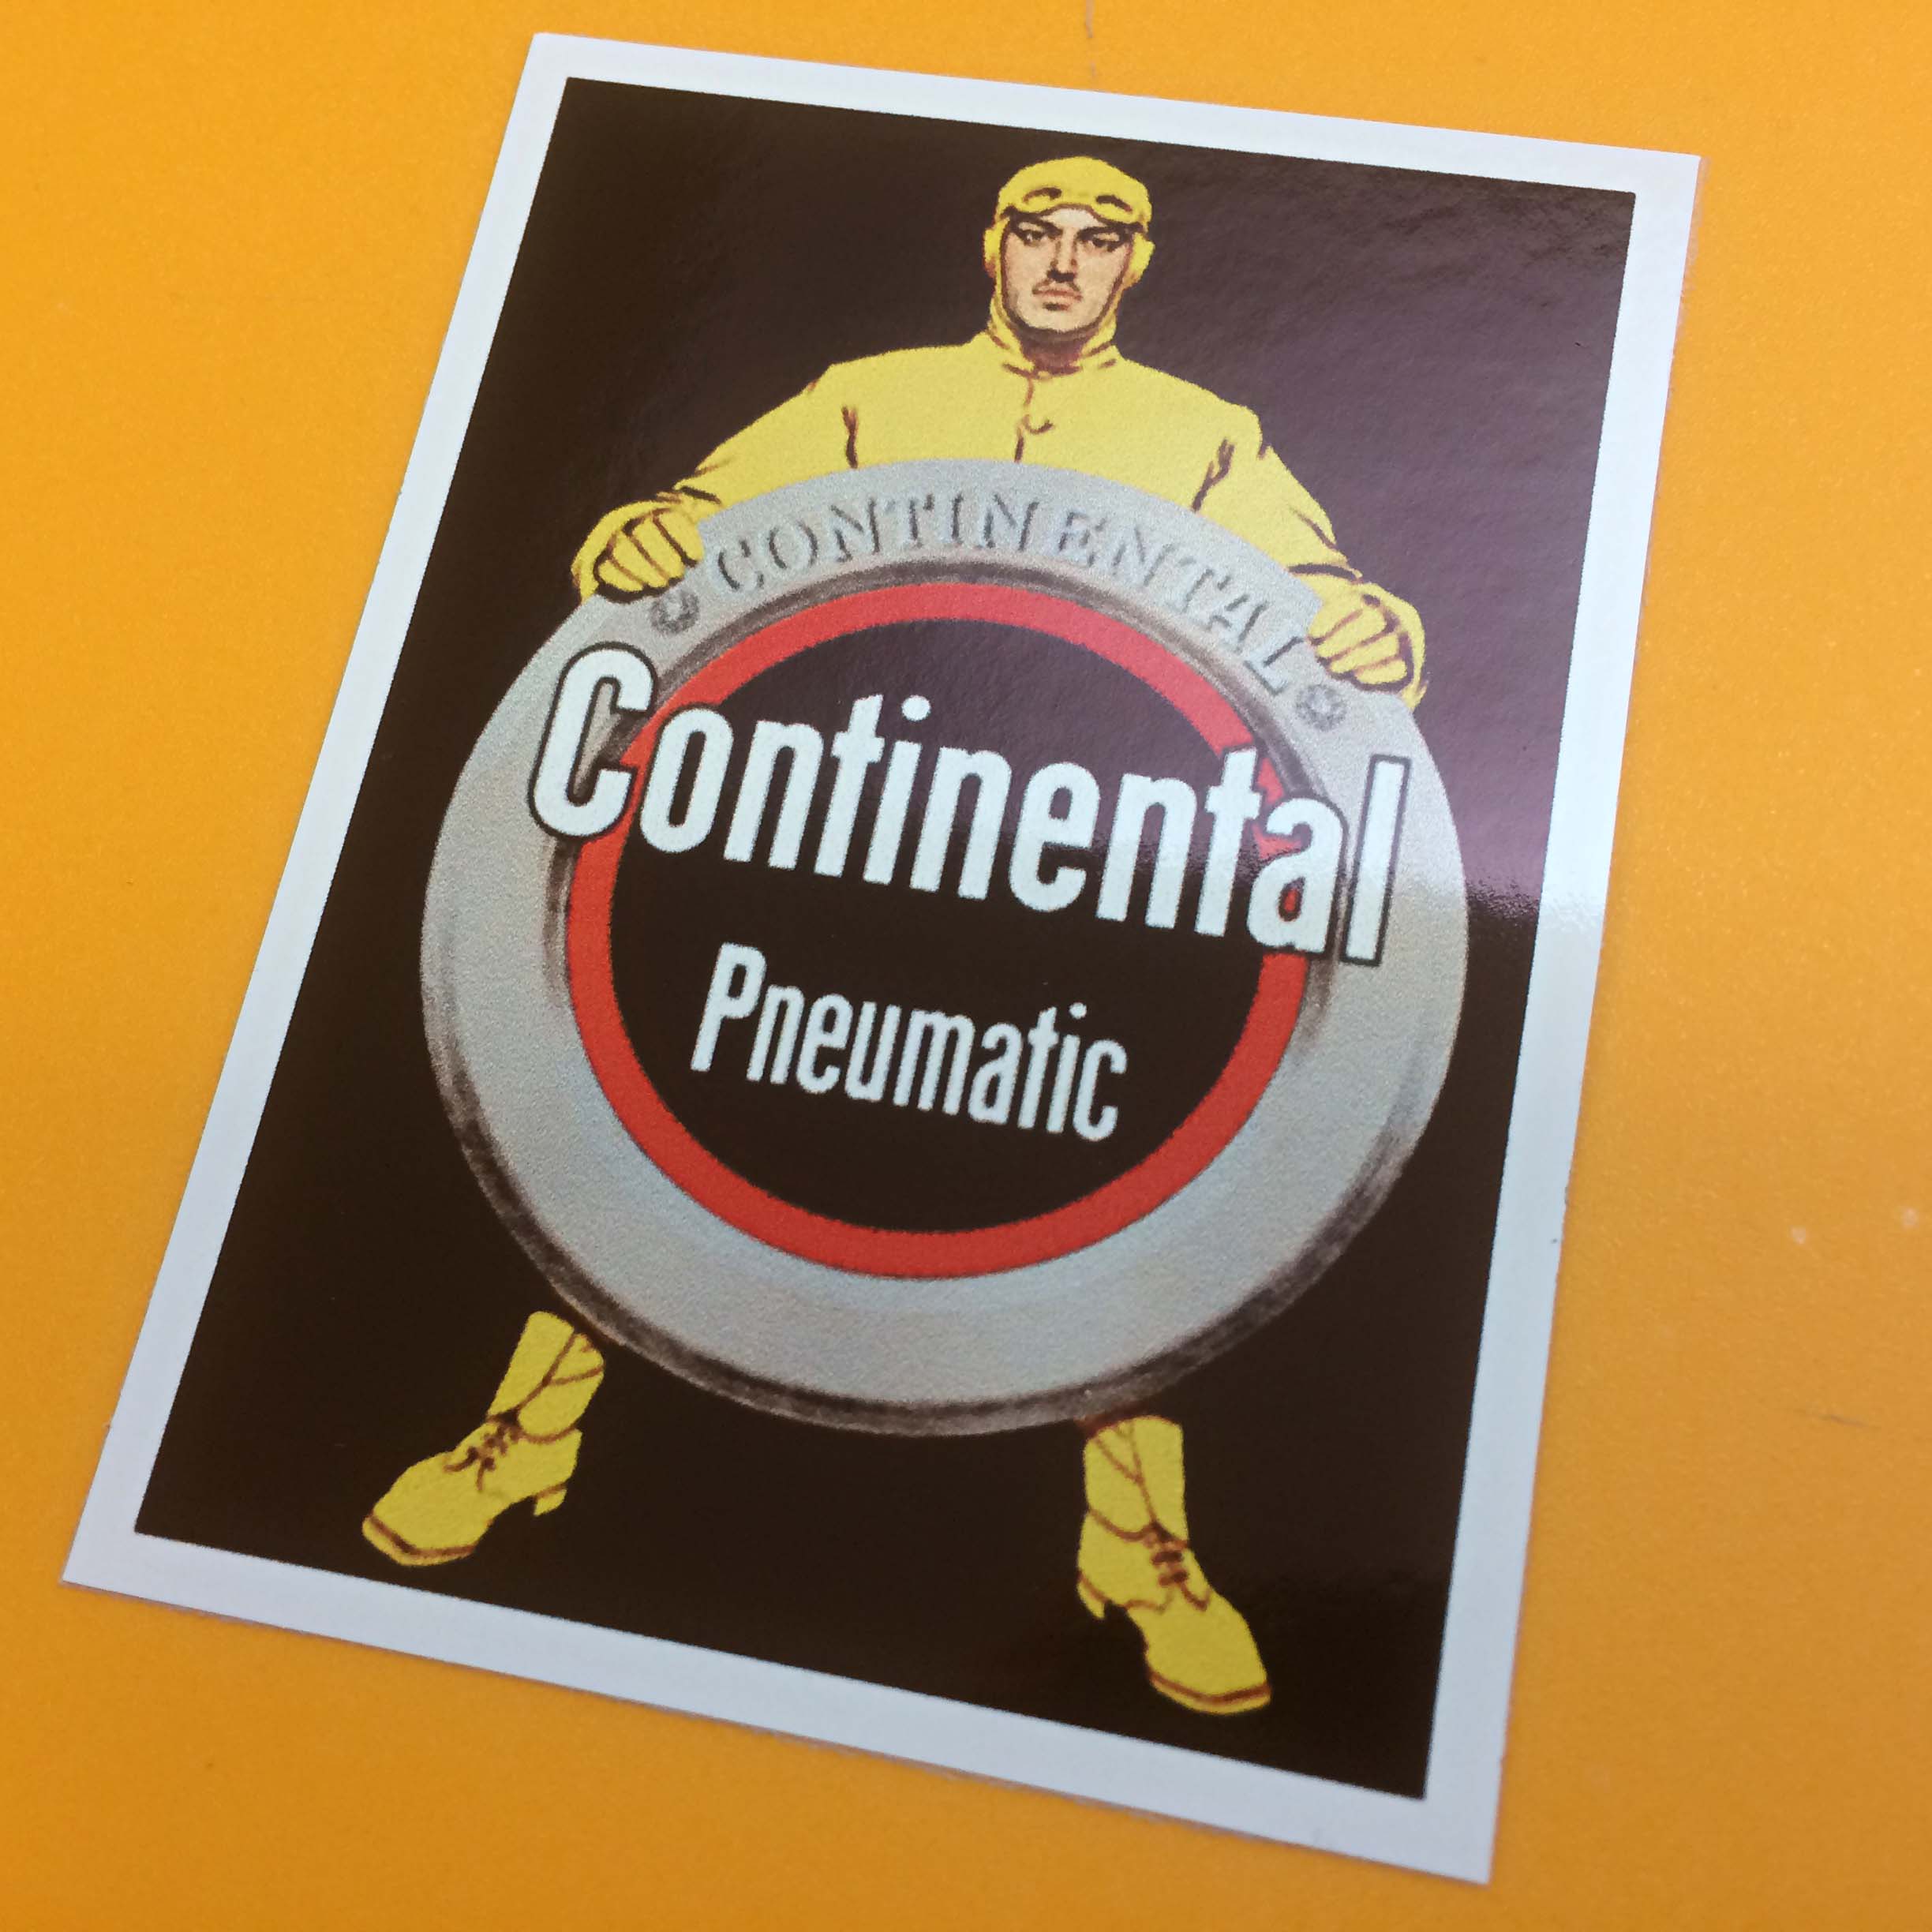 CONTINENTAL PNEUMATIC STICKER. A man wearing a yellow vintage car racing suit, goggles and ear muffs on a black background. He is standing behind and resting both hands on a Continental tyre. Continental Pneumatic in white lettering overlays the image.